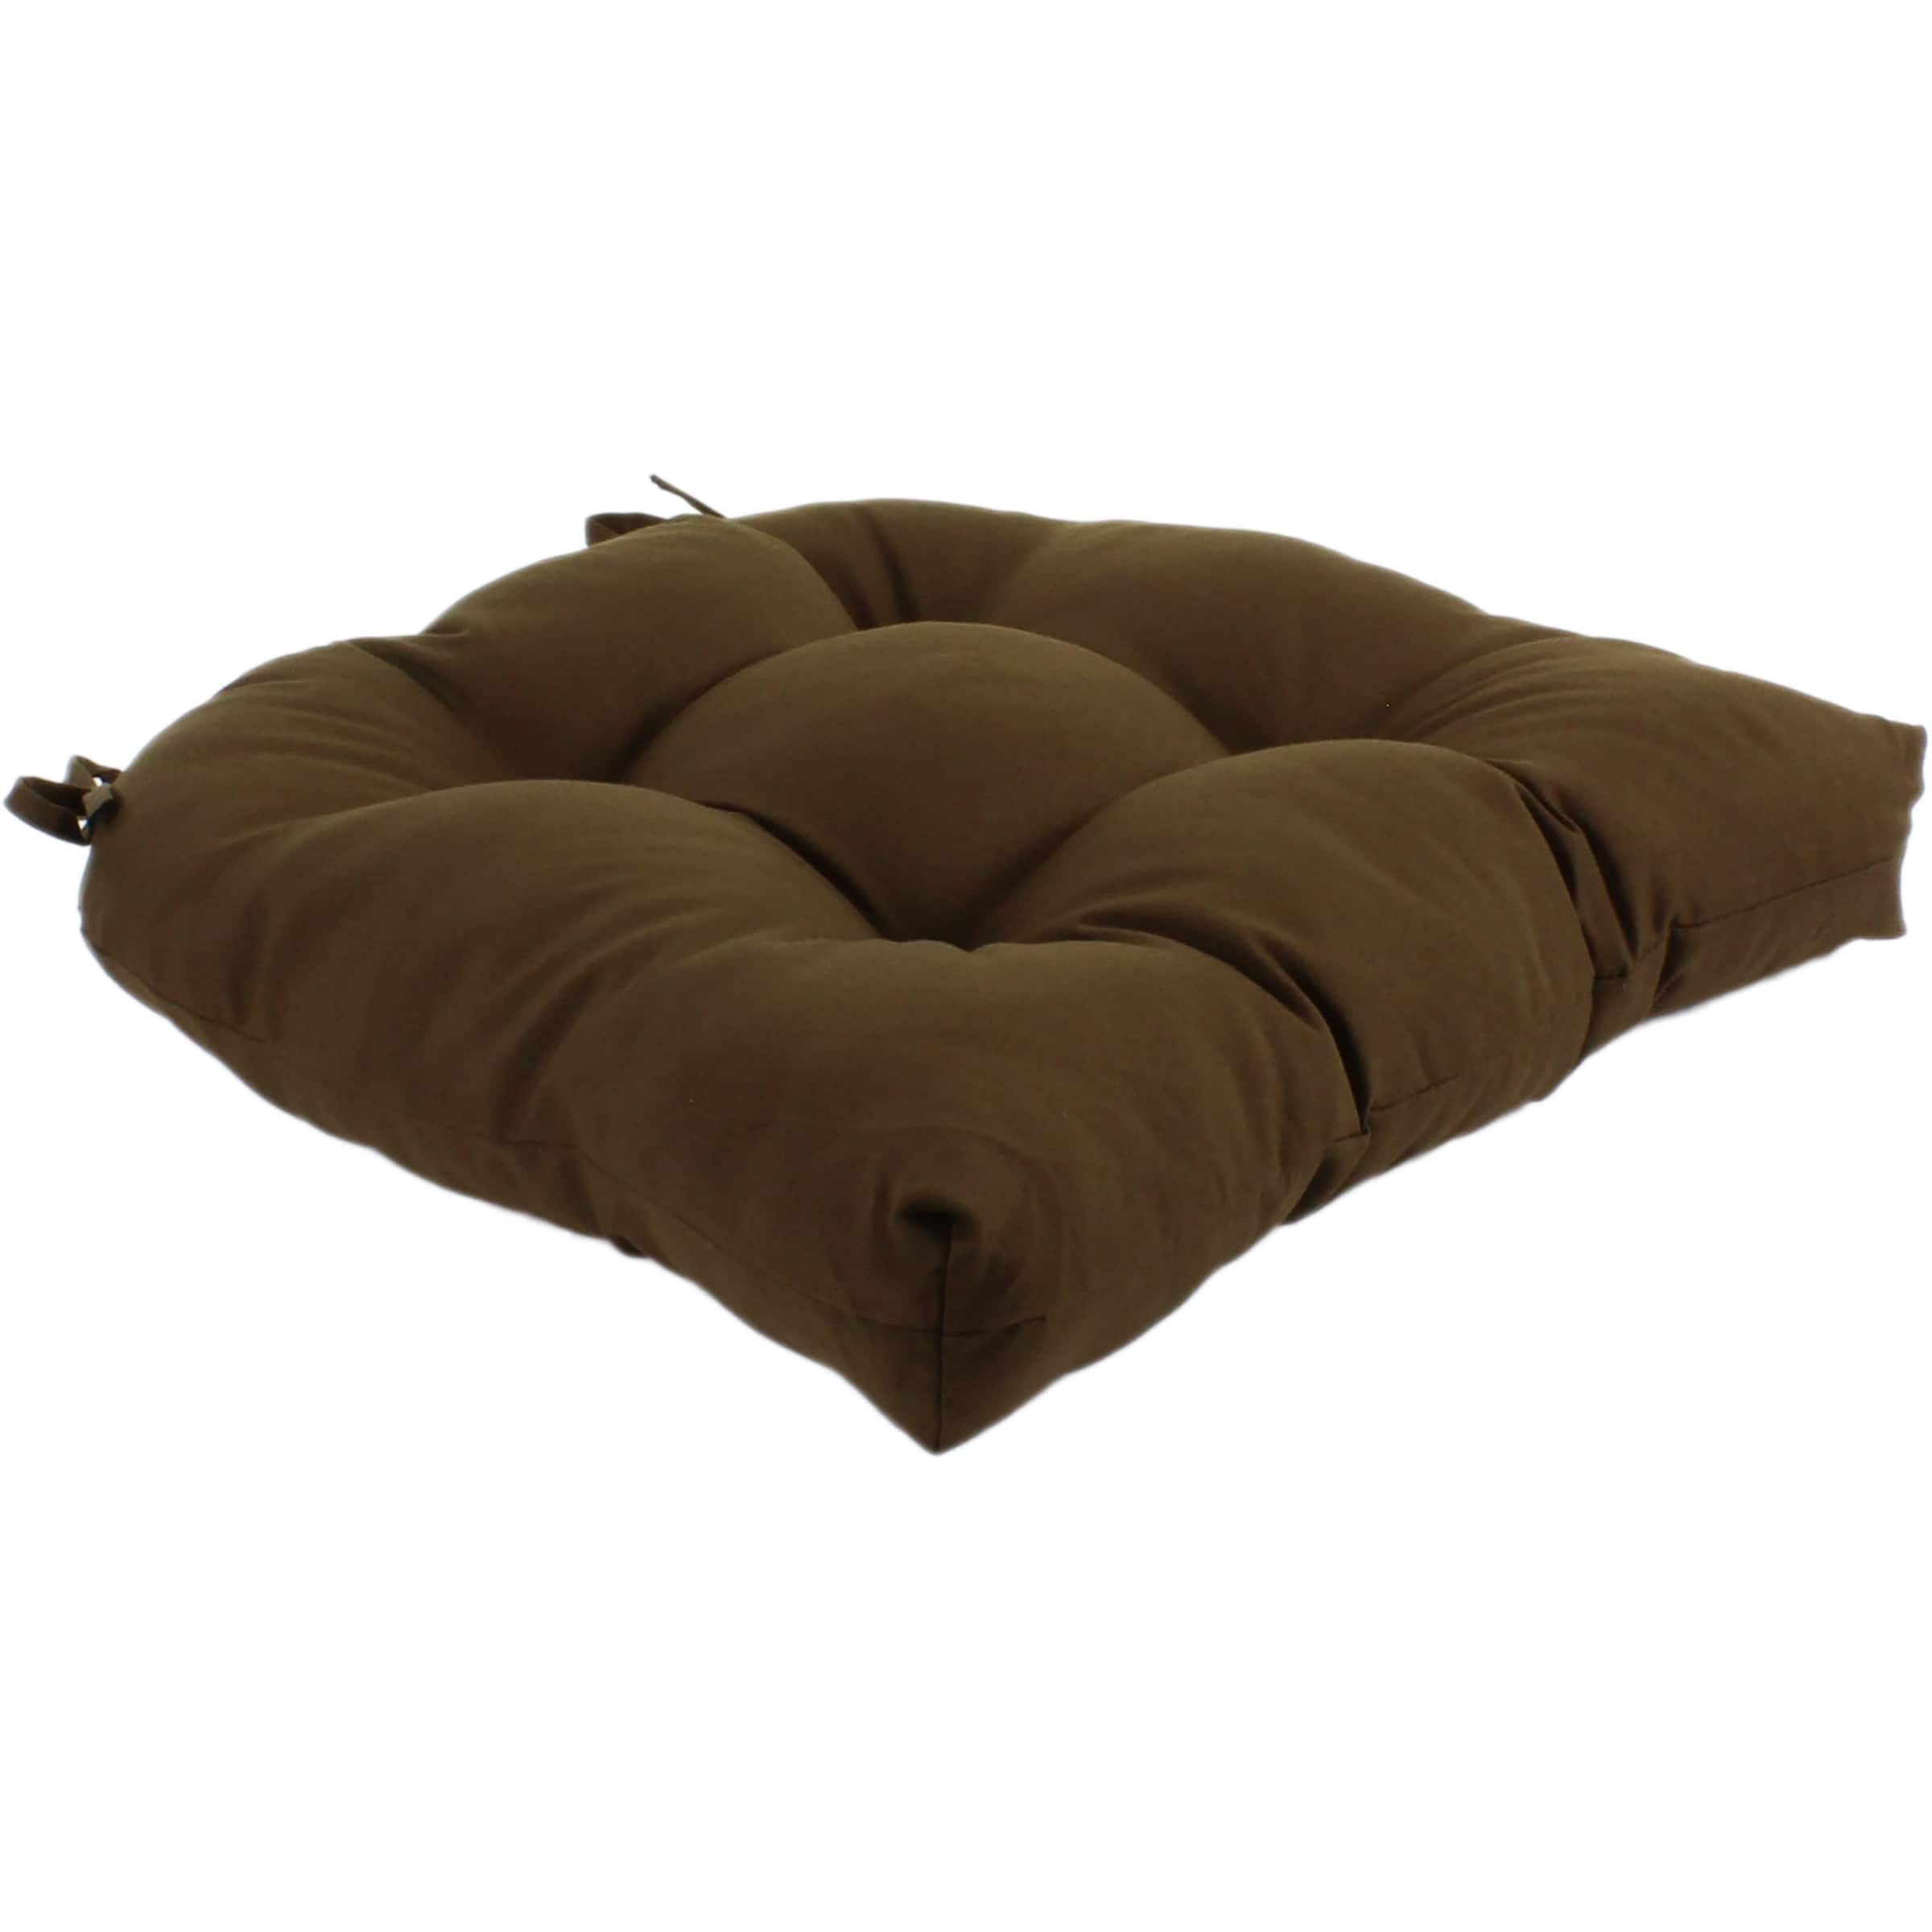 https://ak1.ostkcdn.com/images/products/is/images/direct/a2300e41b7c65b069cb91e6fcf6ce6677892780c/Indoor-Outdoor-Plush-Patio-Seat-Cushion.jpg